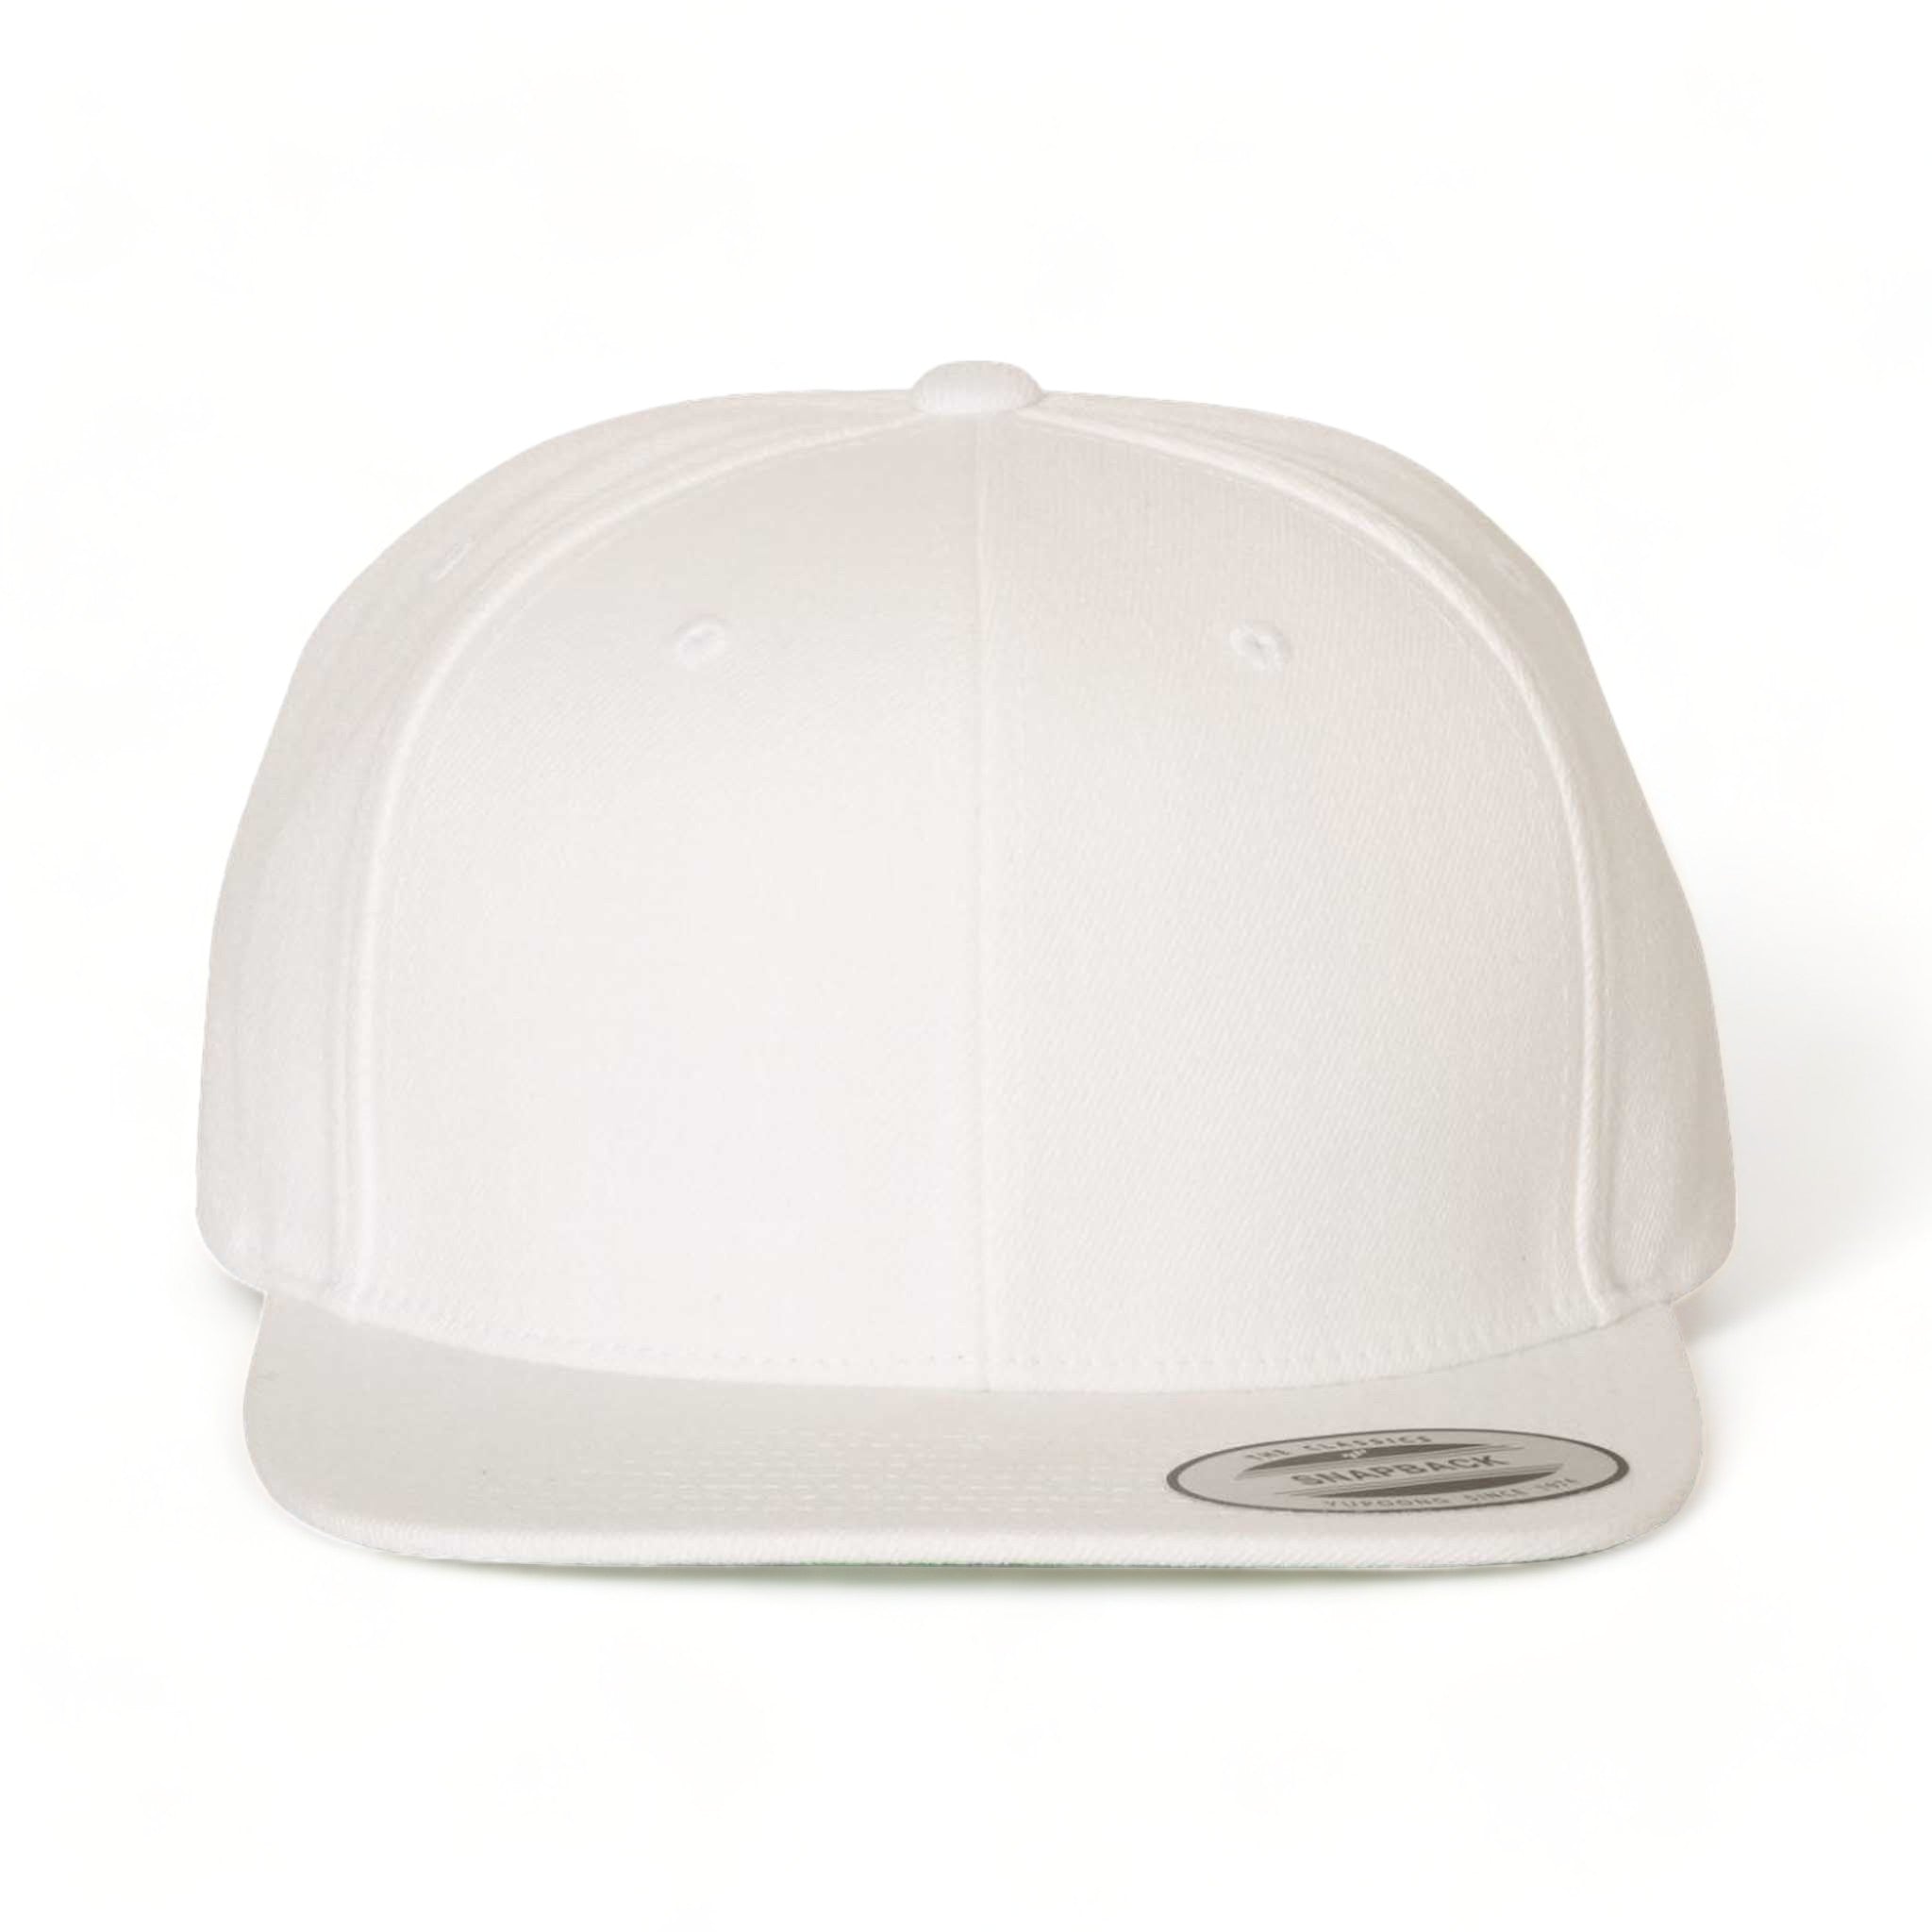 Front view of YP Classics 6089M custom hat in white